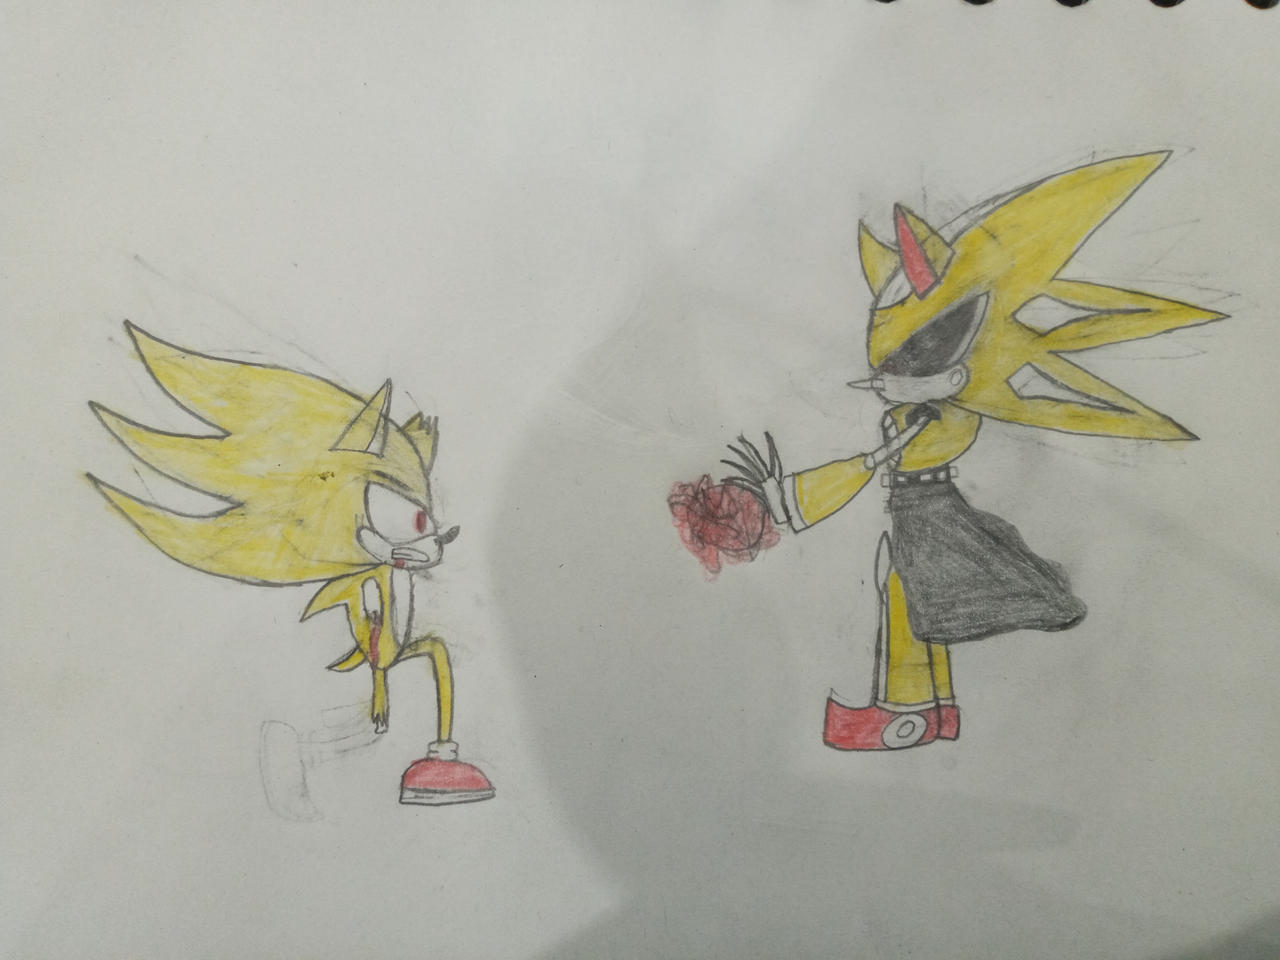 Super Mecha Sonic vs Super Neo Metal Sonic by WOLFBLADE111 on DeviantArt